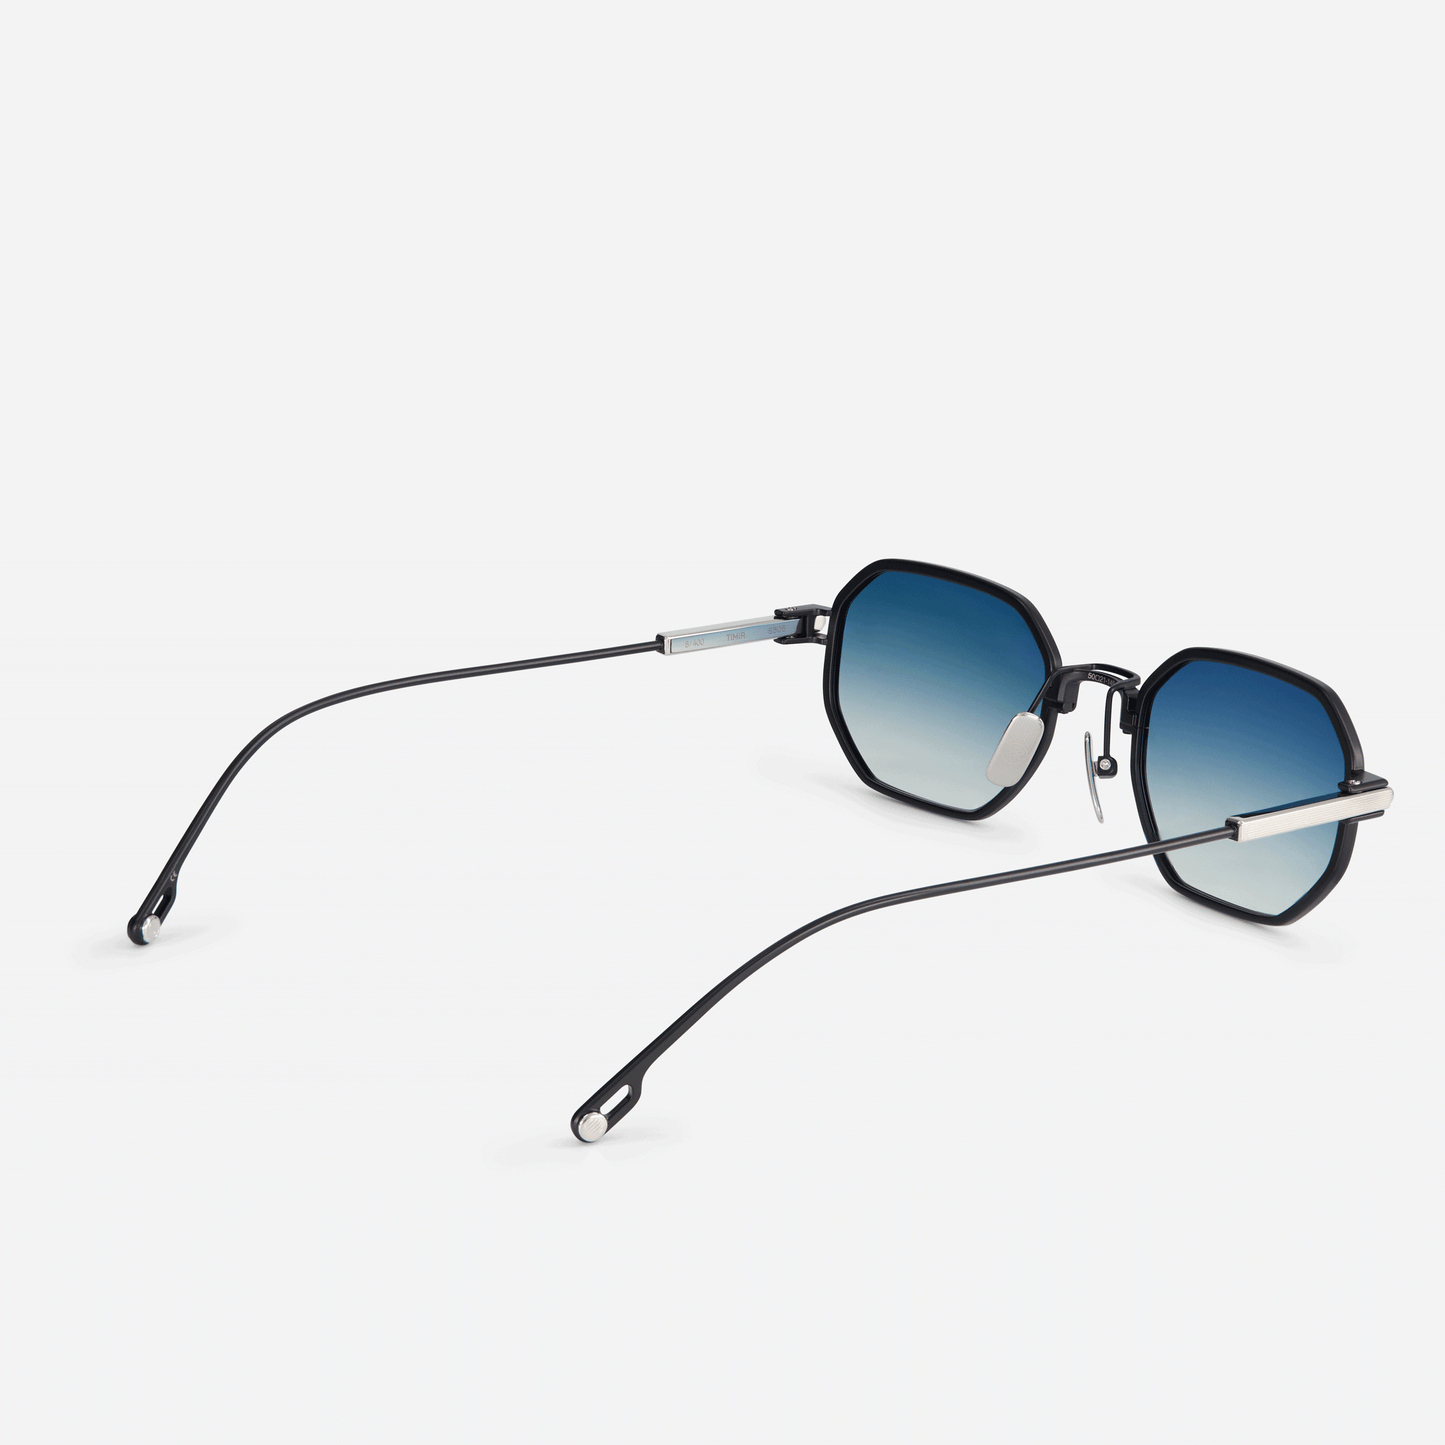 Timir S505 hexagonal glasses. Crafted from pure black titanium, these eyewear pieces feature trendy blue gradient tinted lenses, making them a perfect choice for fashion-forward men and women looking to make a statement. SATO 